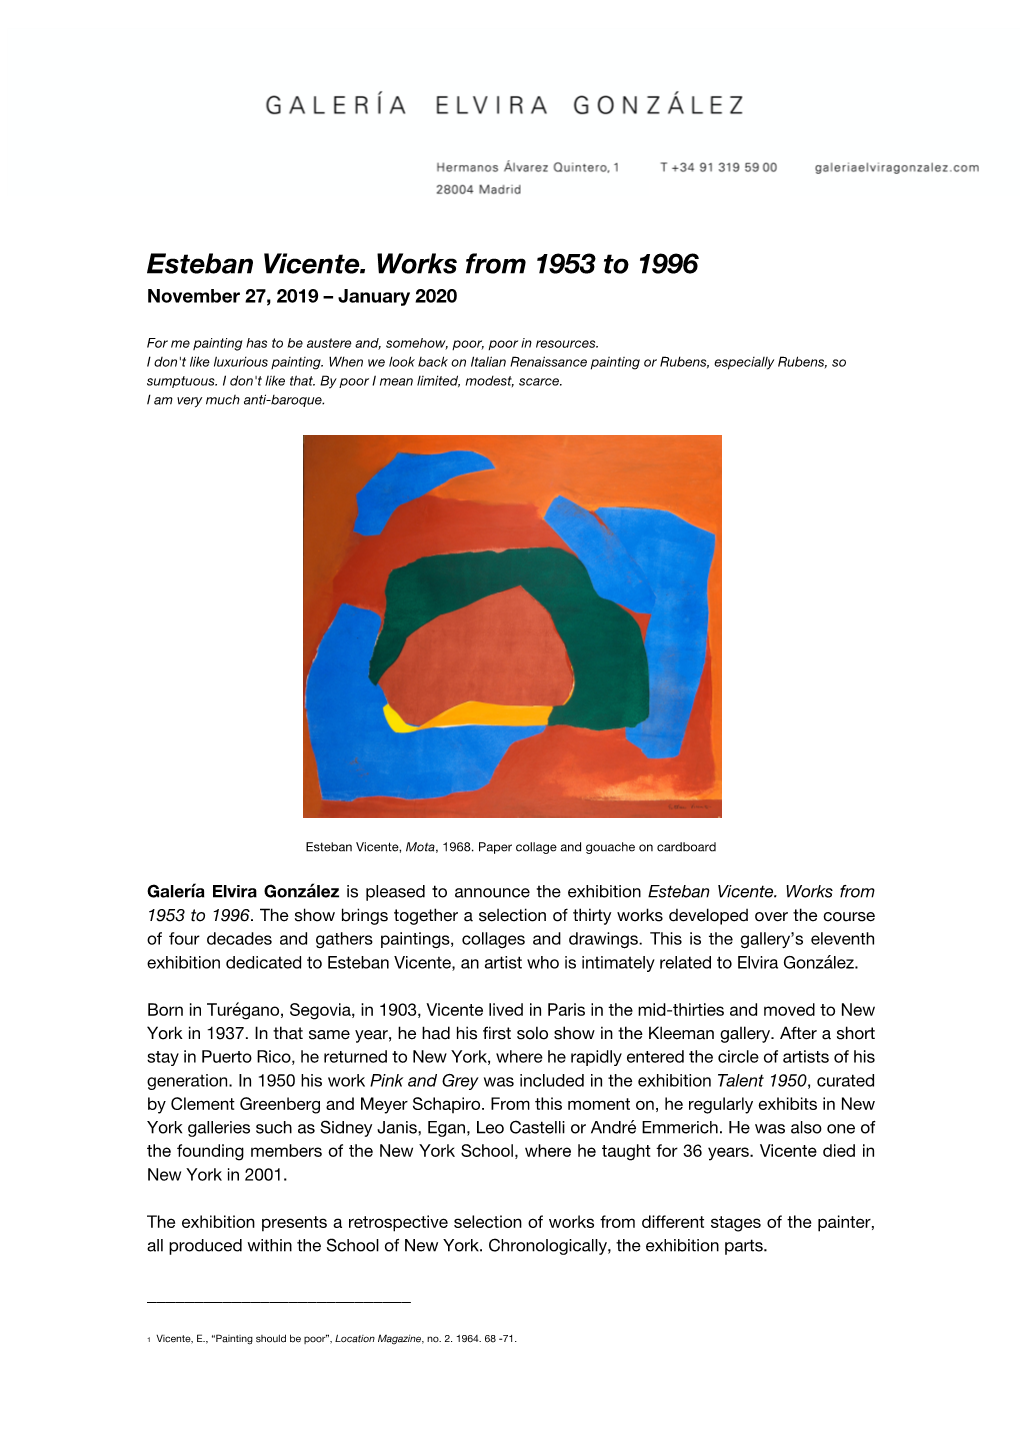 Esteban Vicente. Works from 1953 to 1996 November 27, 2019 – January 2020